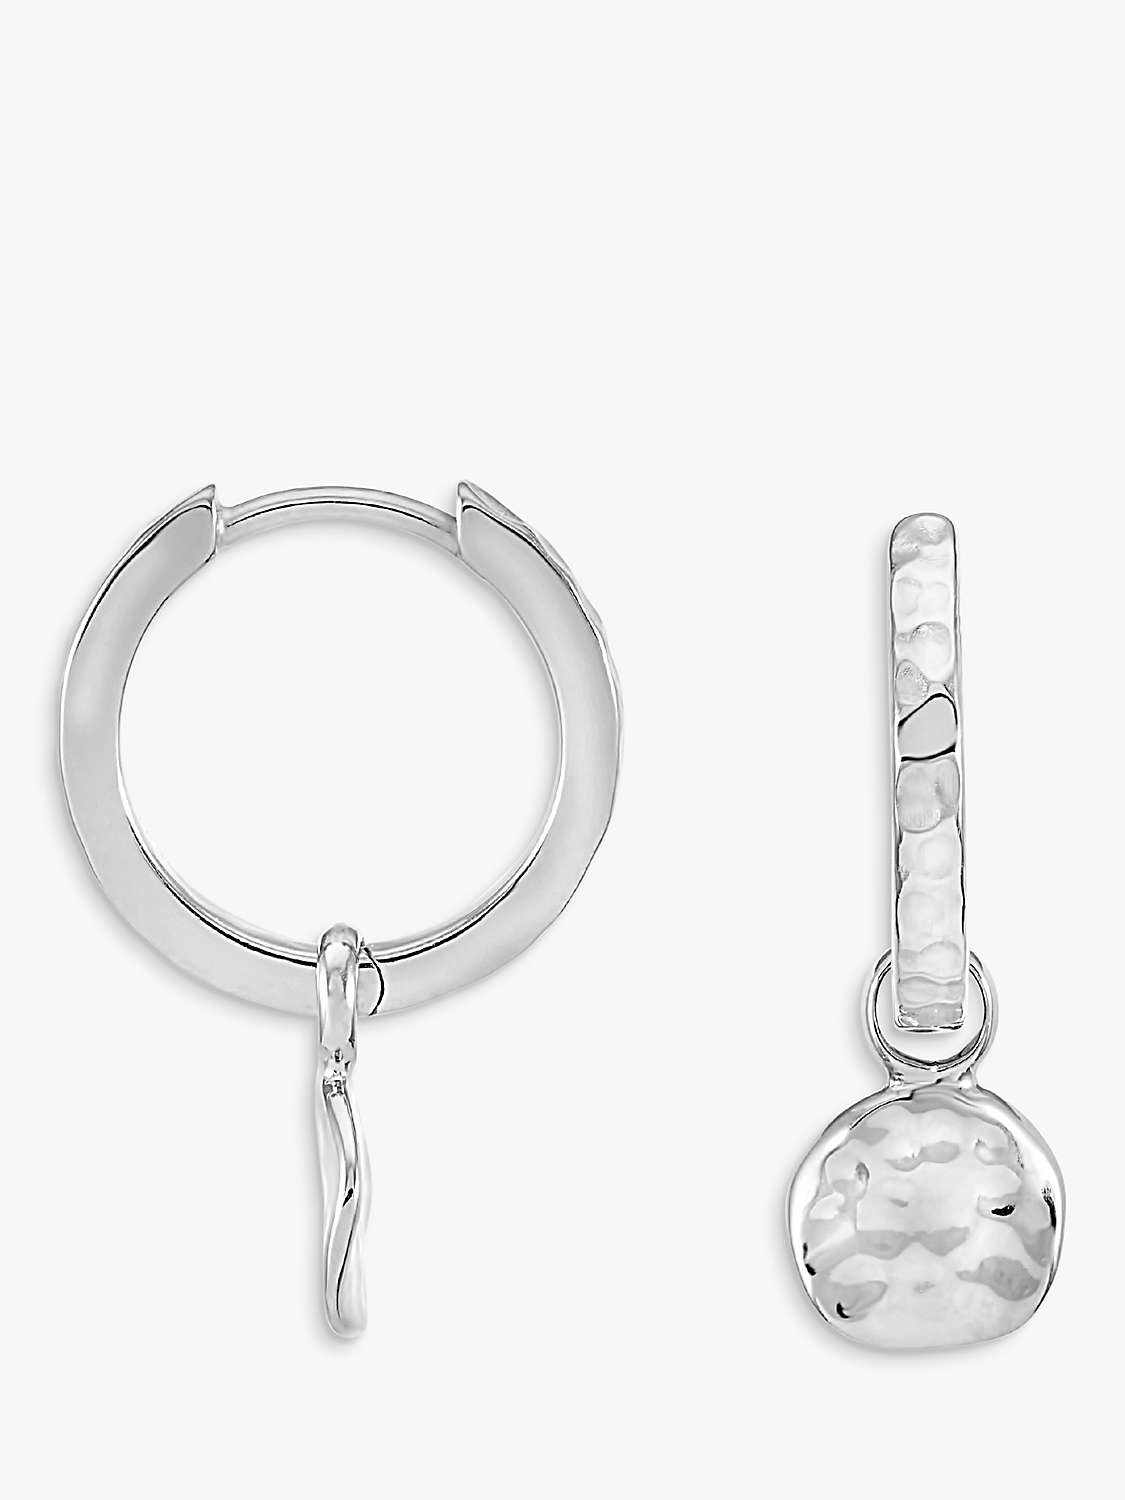 Buy Dower & Hall Sterling Silver Hammered Disc Charm Story Hoop Earrings, Silver Online at johnlewis.com